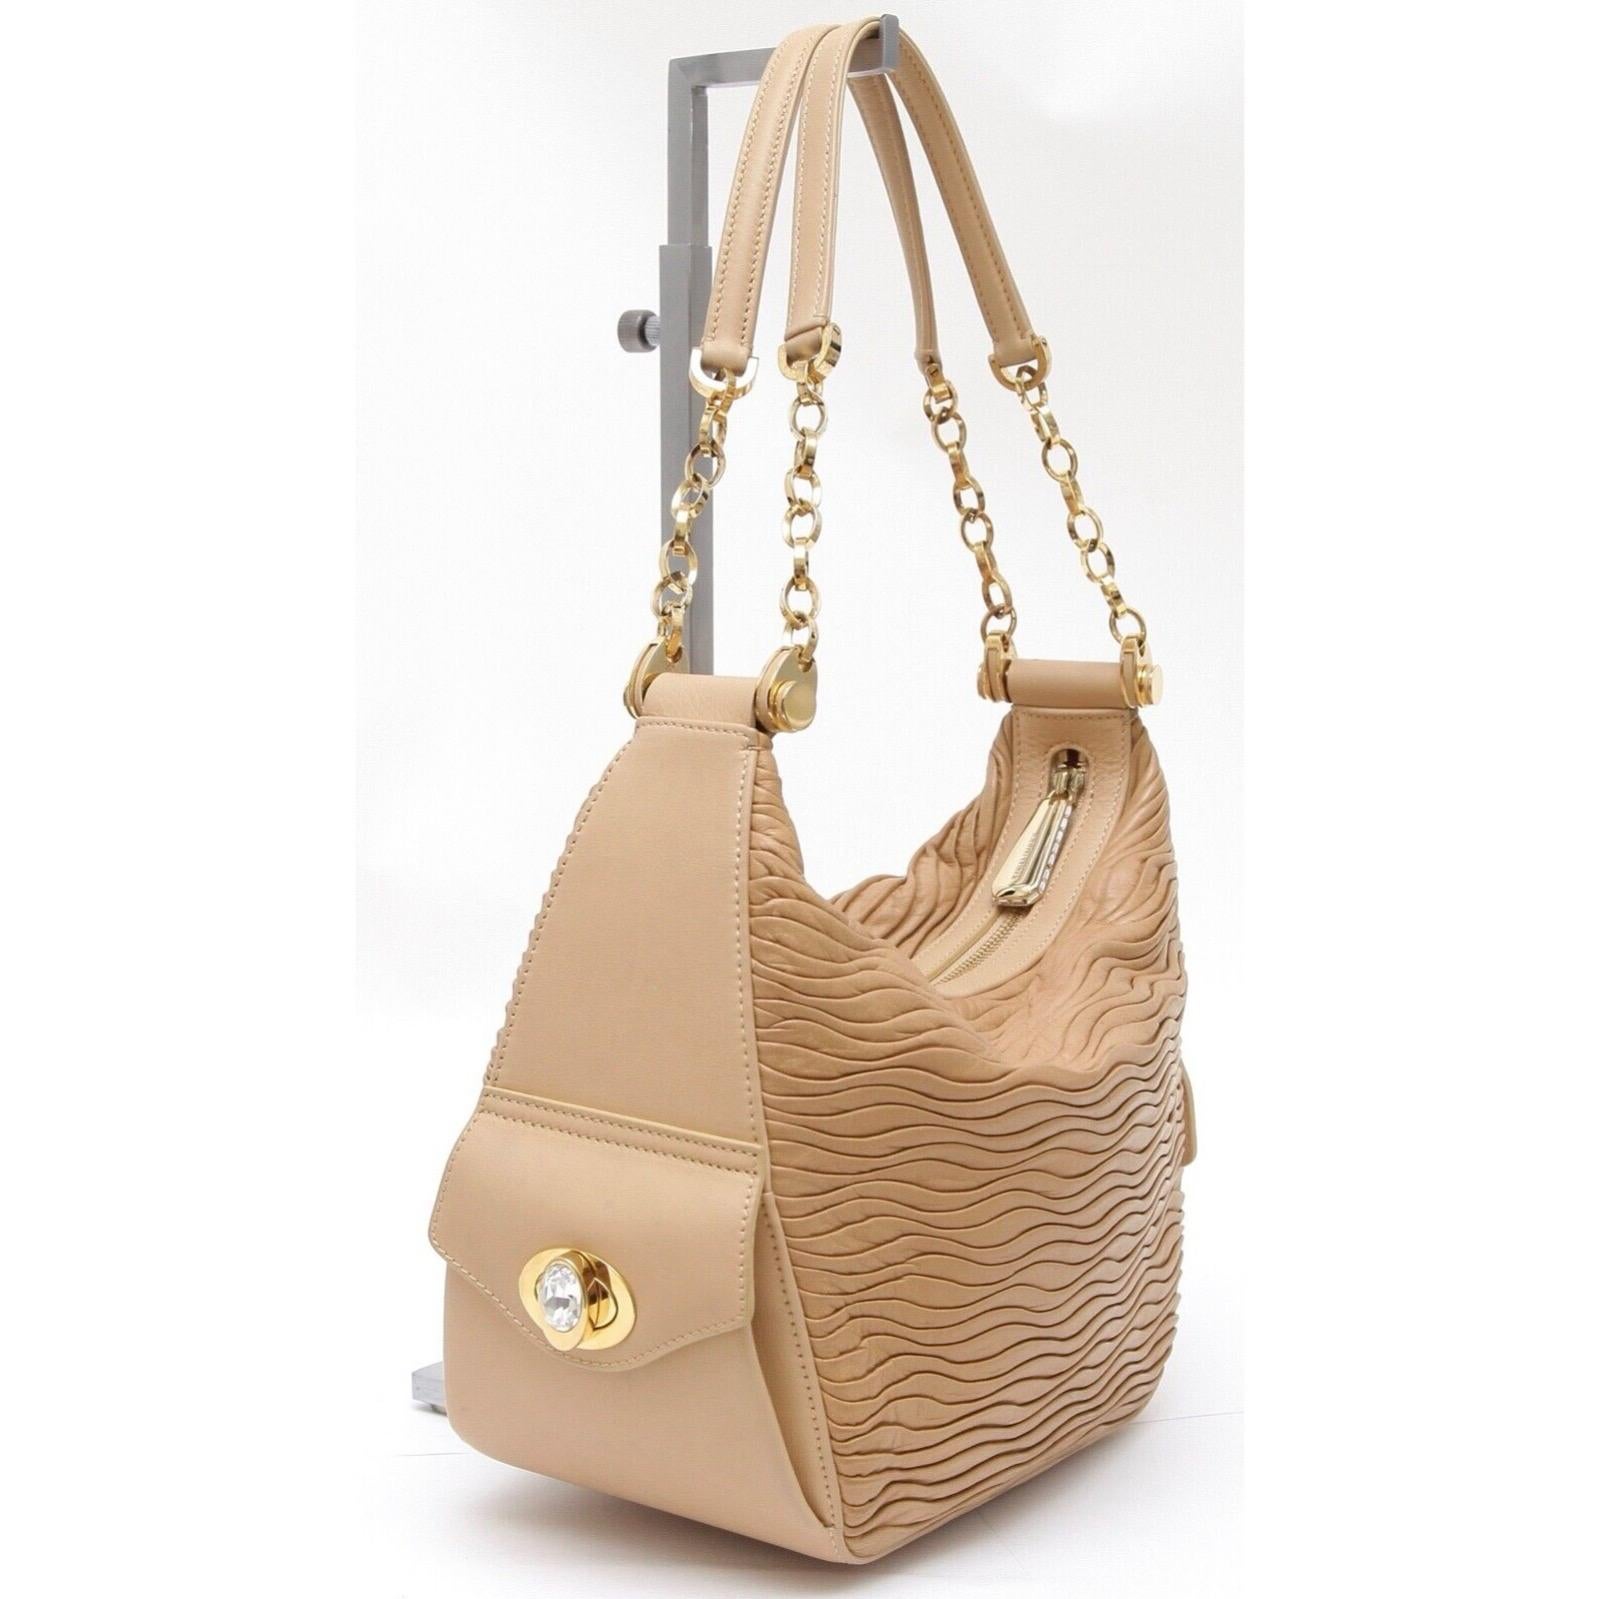 GUARANTEED AUTHENTIC JUDITH LEIBER BEIGE PLEATED LEATHER SHOULDER BAG

Authenticated by Authenticatefirst


Design: 
- Supple beige pleated leather.
- Double chain link and leather shoulder straps.
- Dual side patch pockets with crystal turn lock